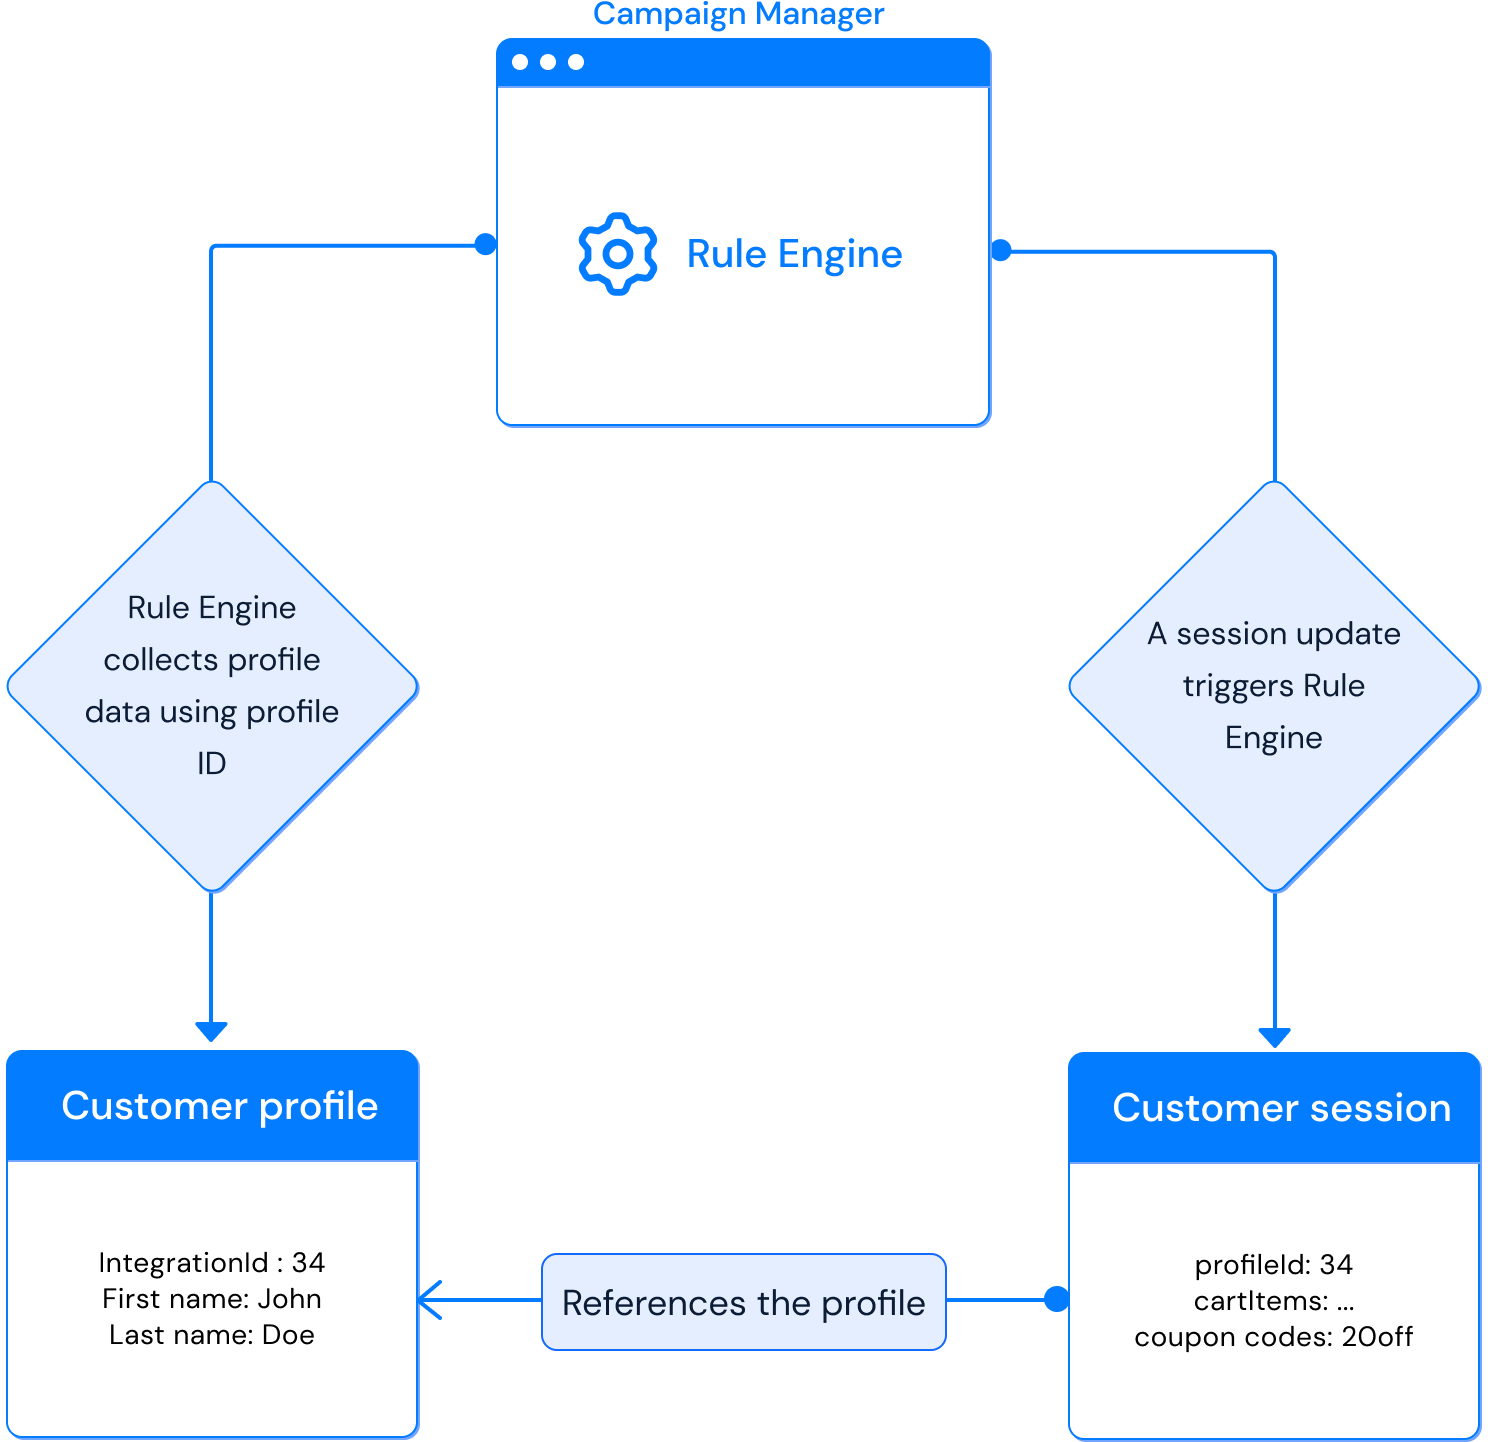 Customer sessions and customer profiles.